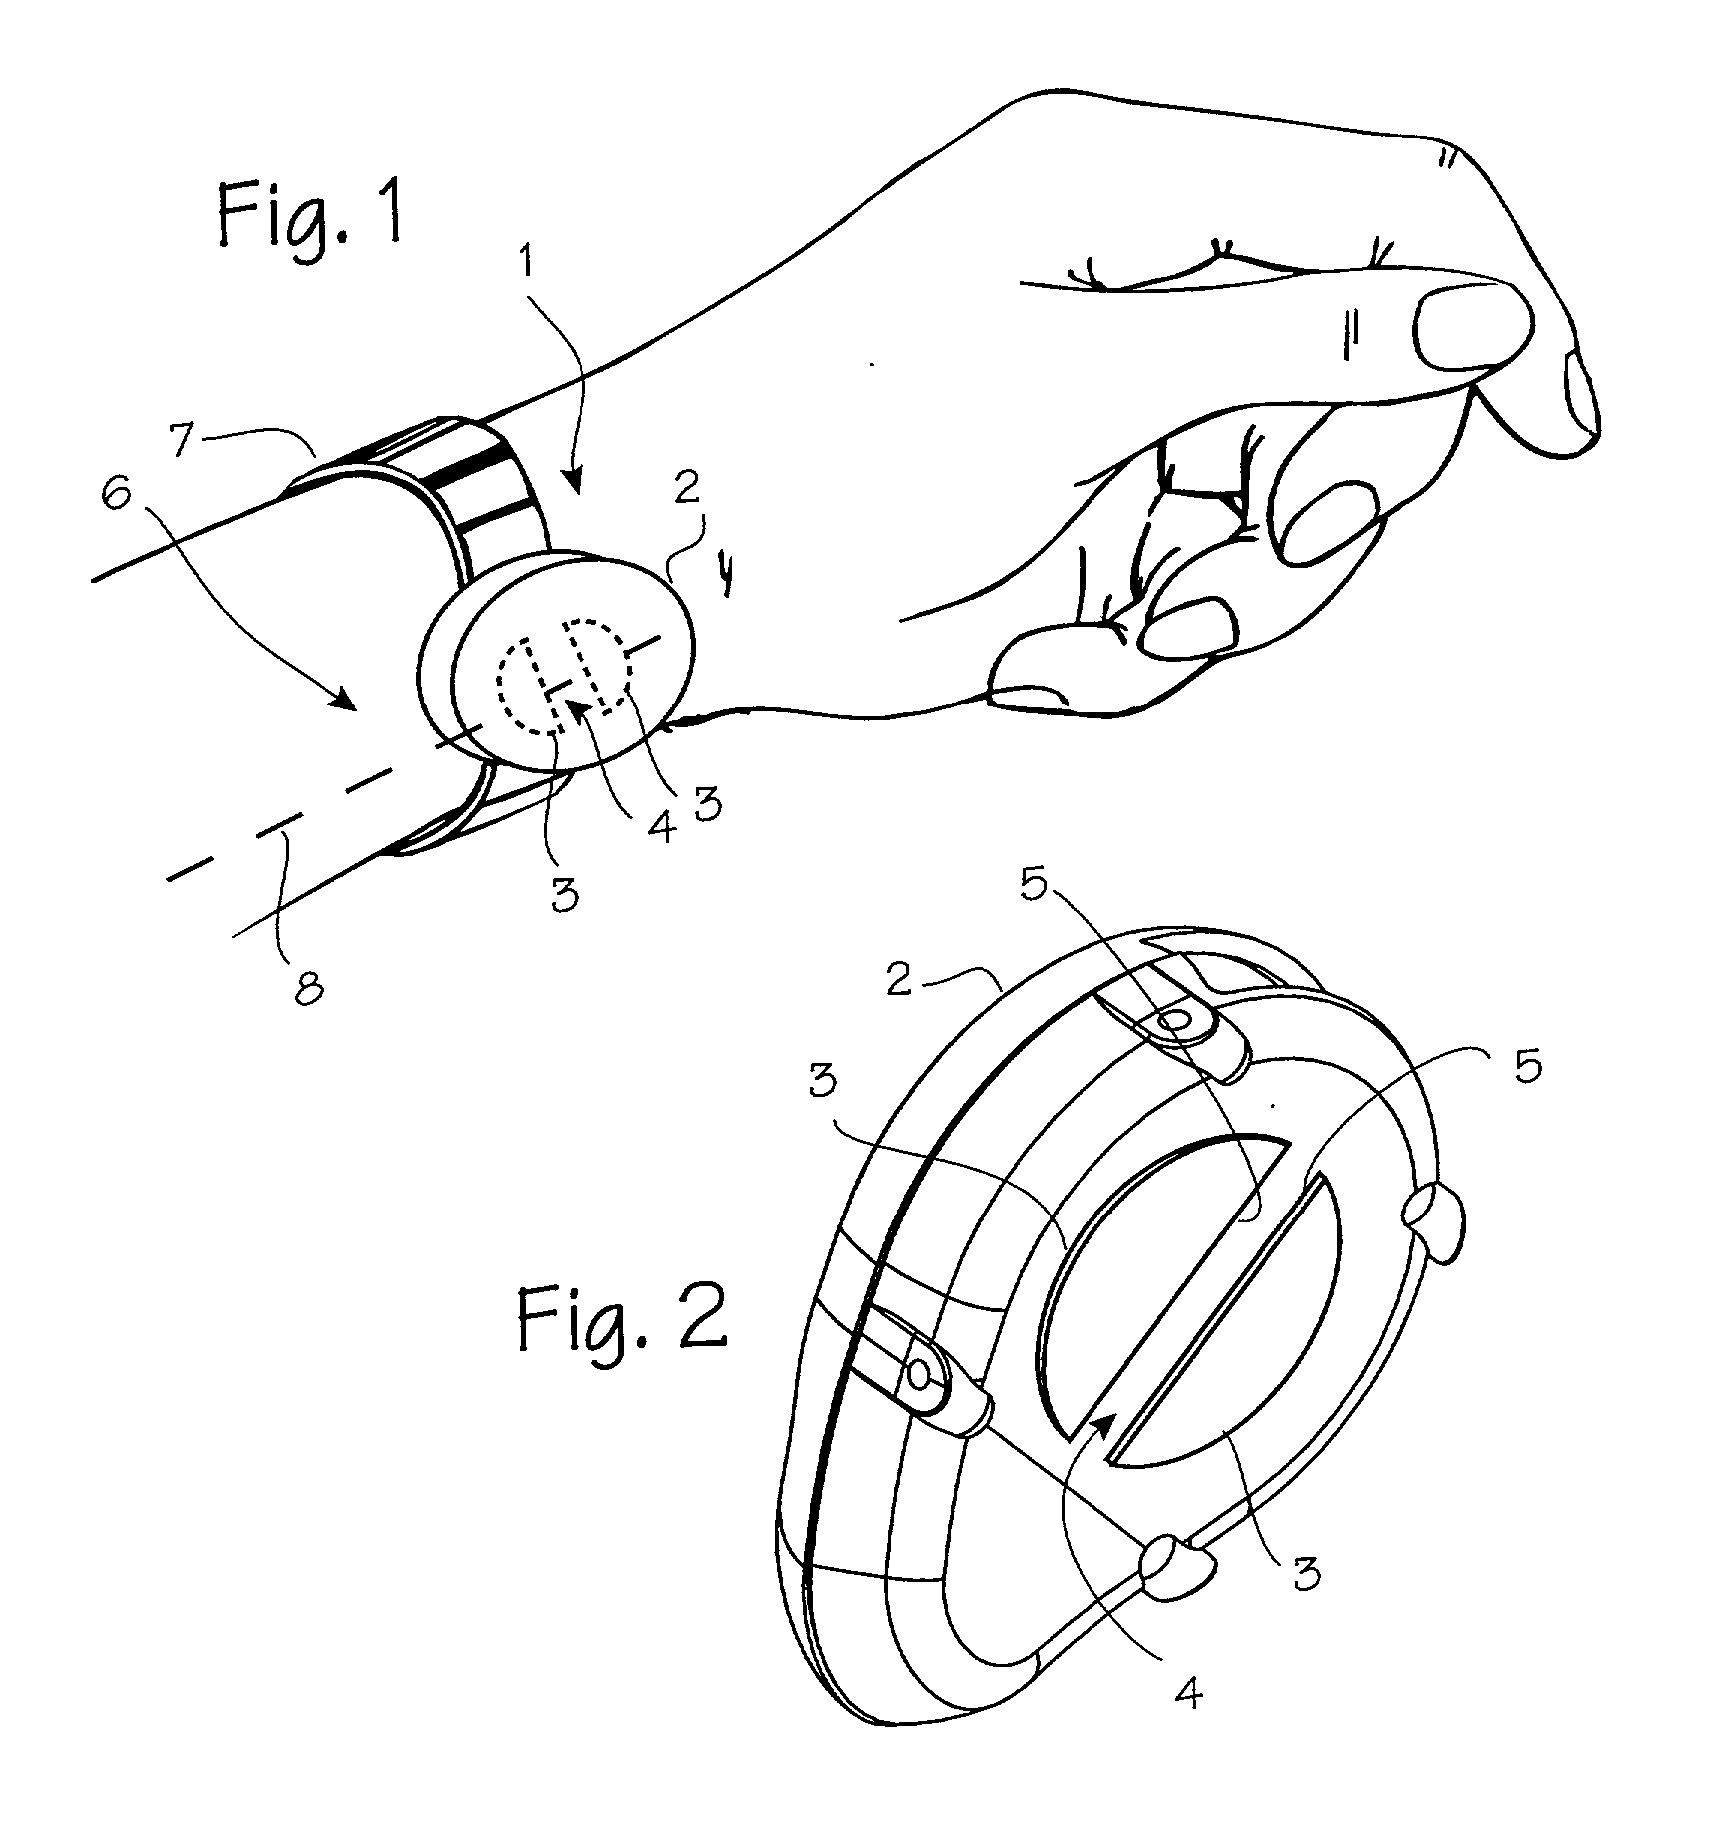 Hydrogel and scrim assembly for use with electro-acupuncture device with stimulation electrodes